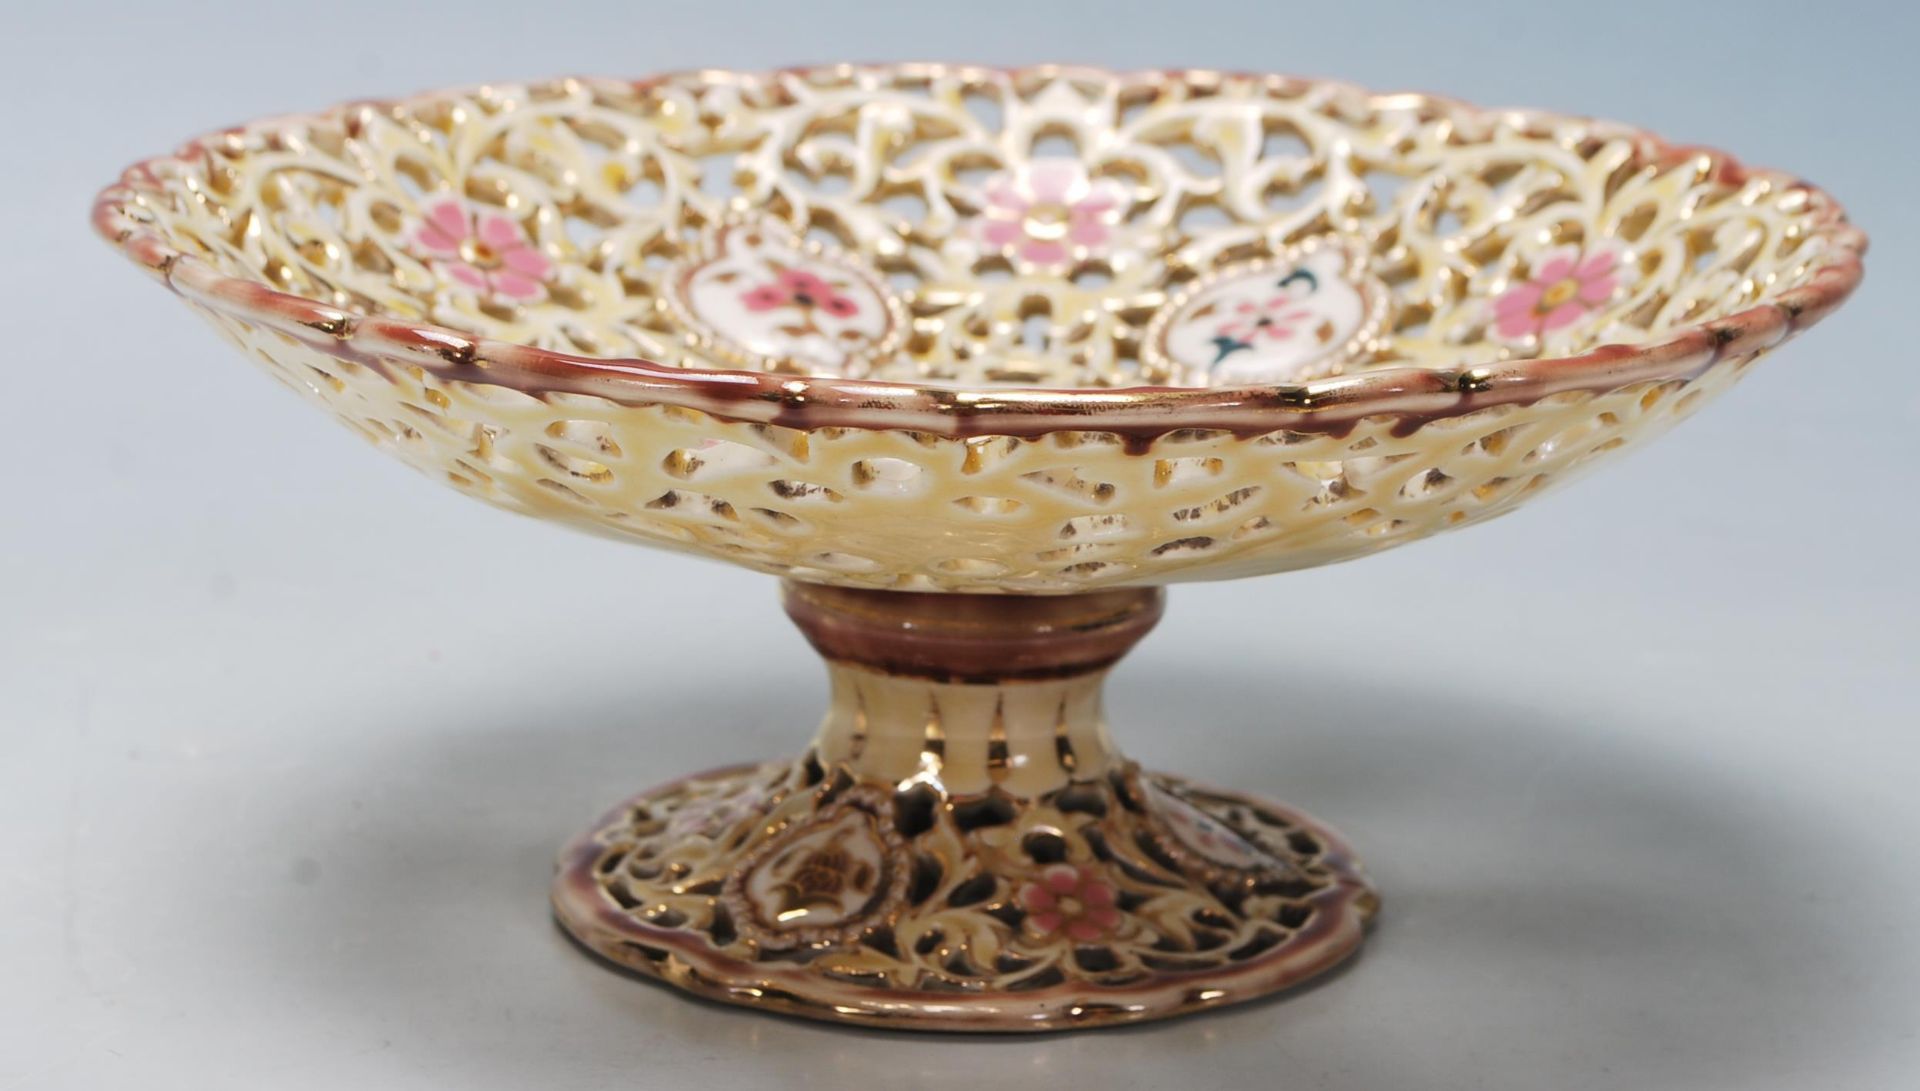 A Victorian 19th Century Hungarian - Zsolnay Pecs pierced porcelain pedestal stand of circular